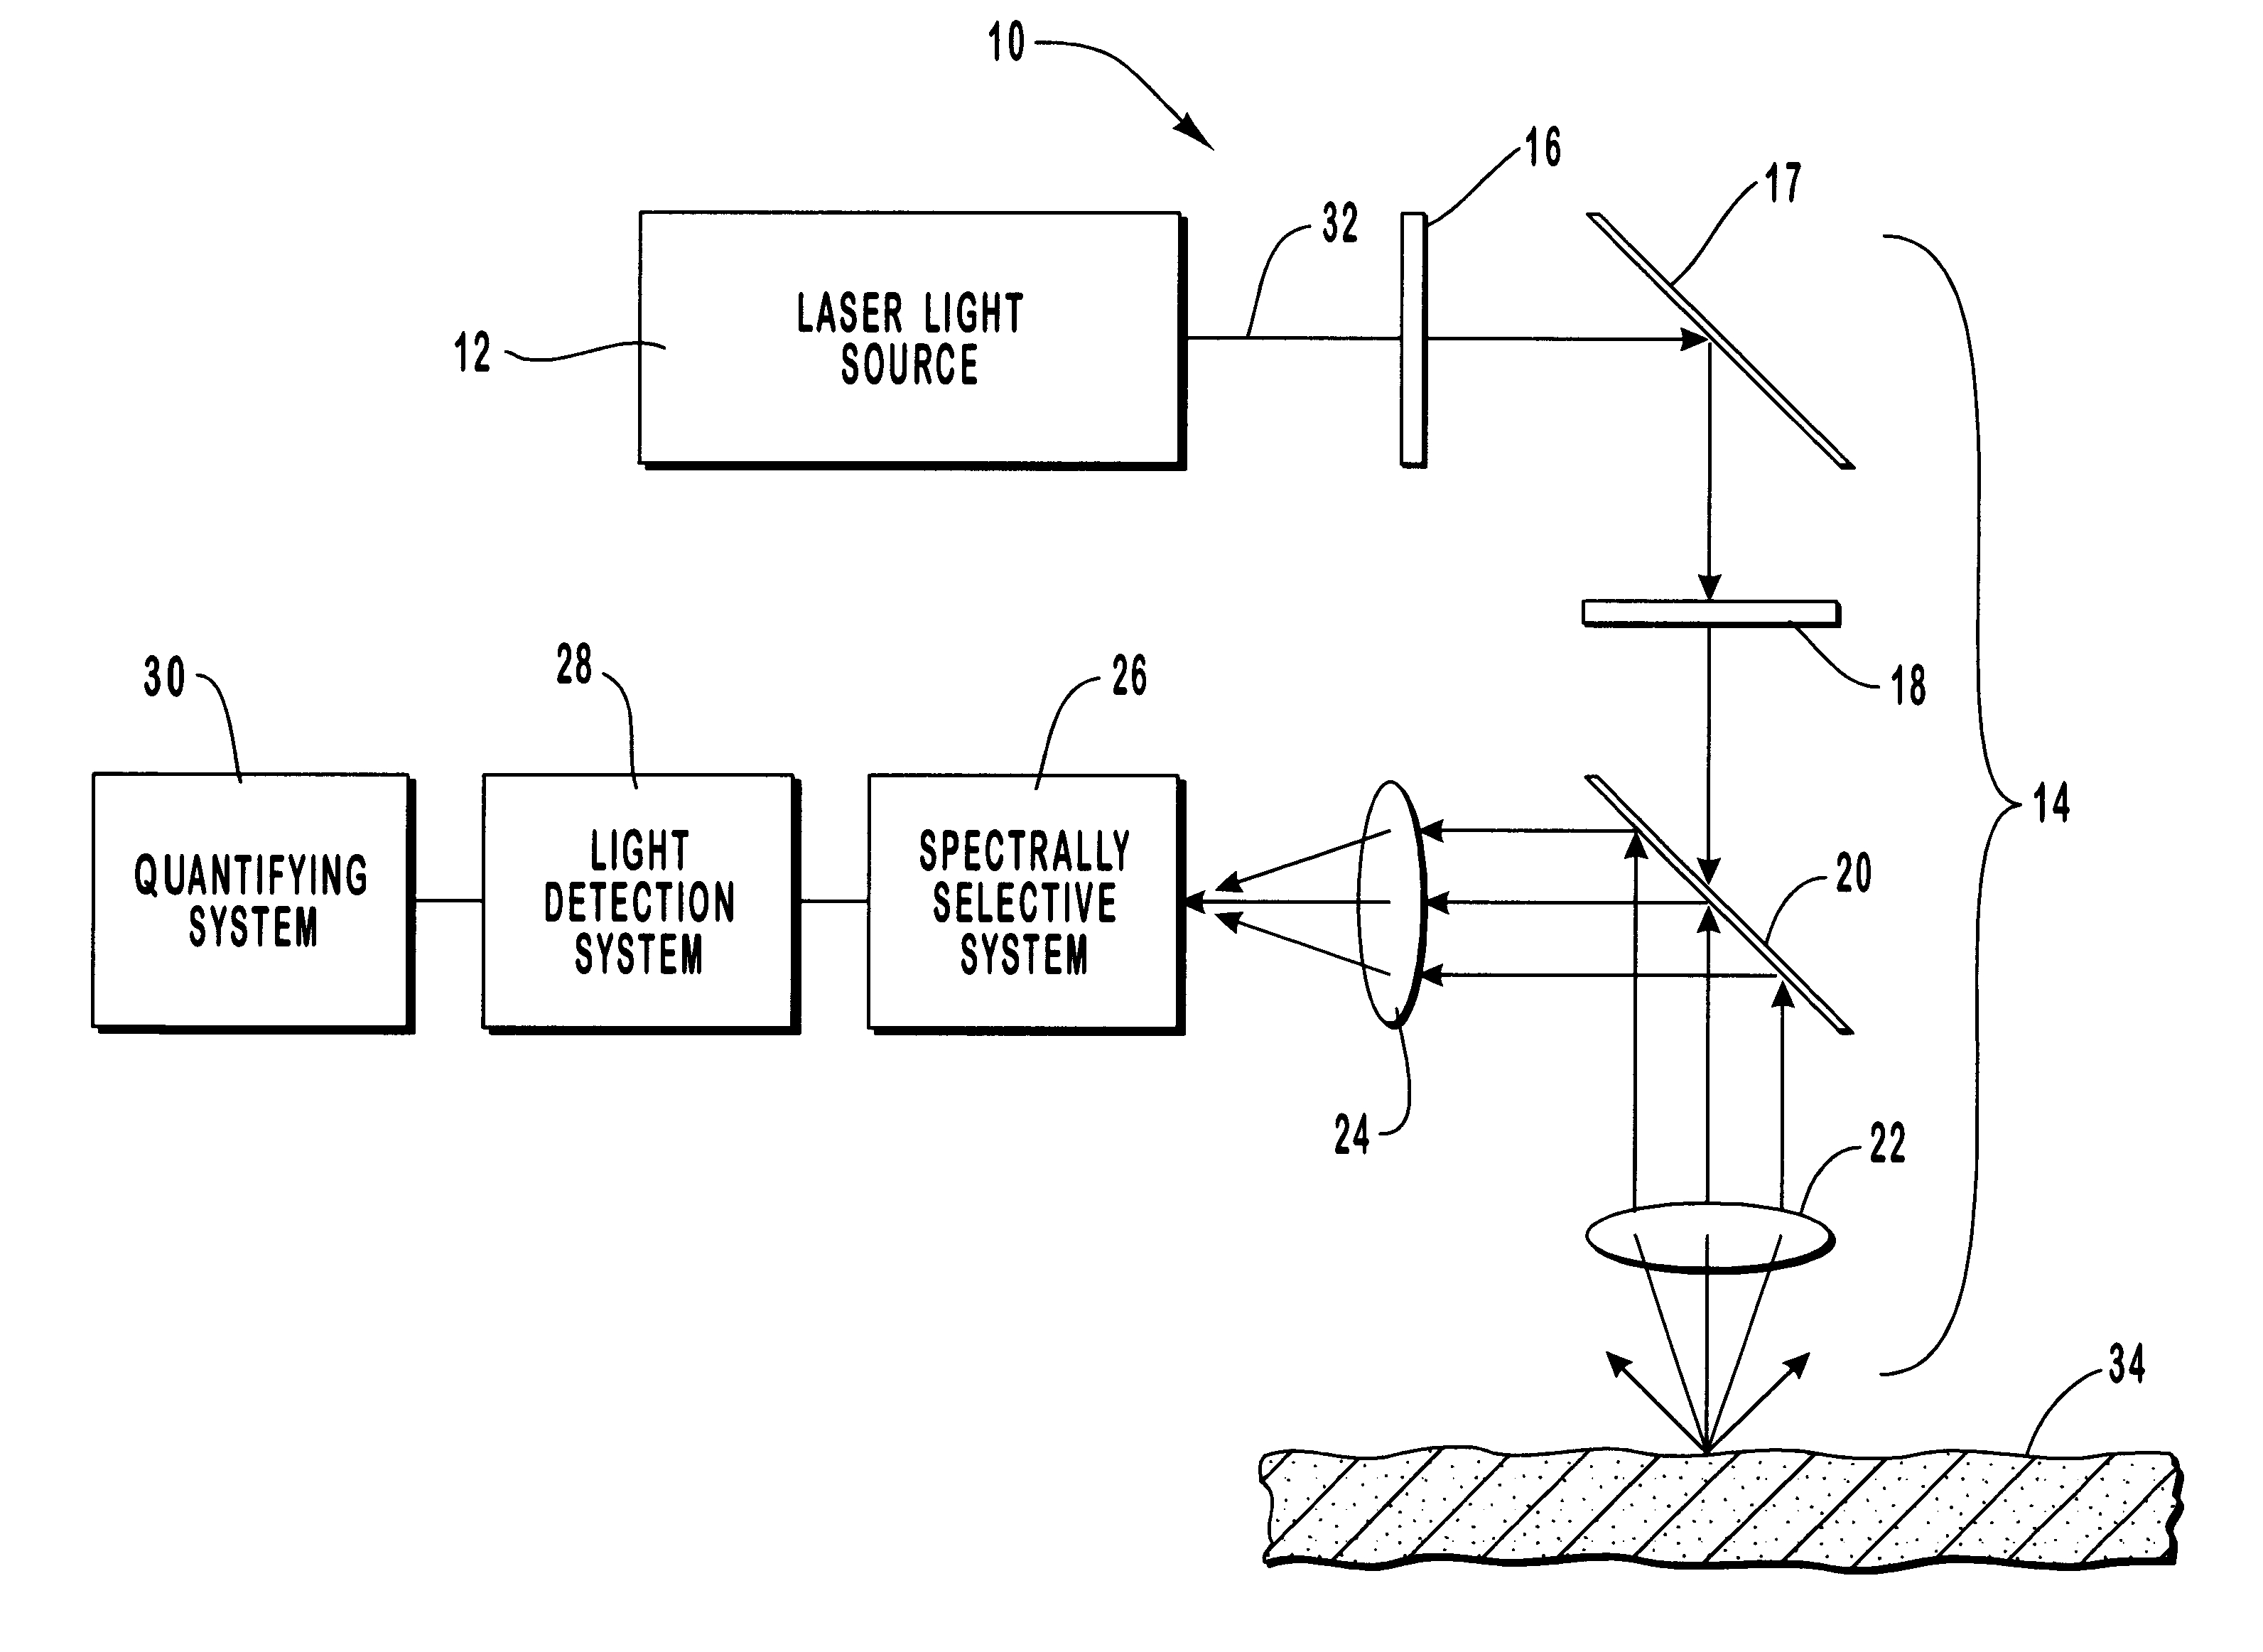 Method and apparatus for noninvasive measurement of carotenoids and related chemical substances in biological tissue